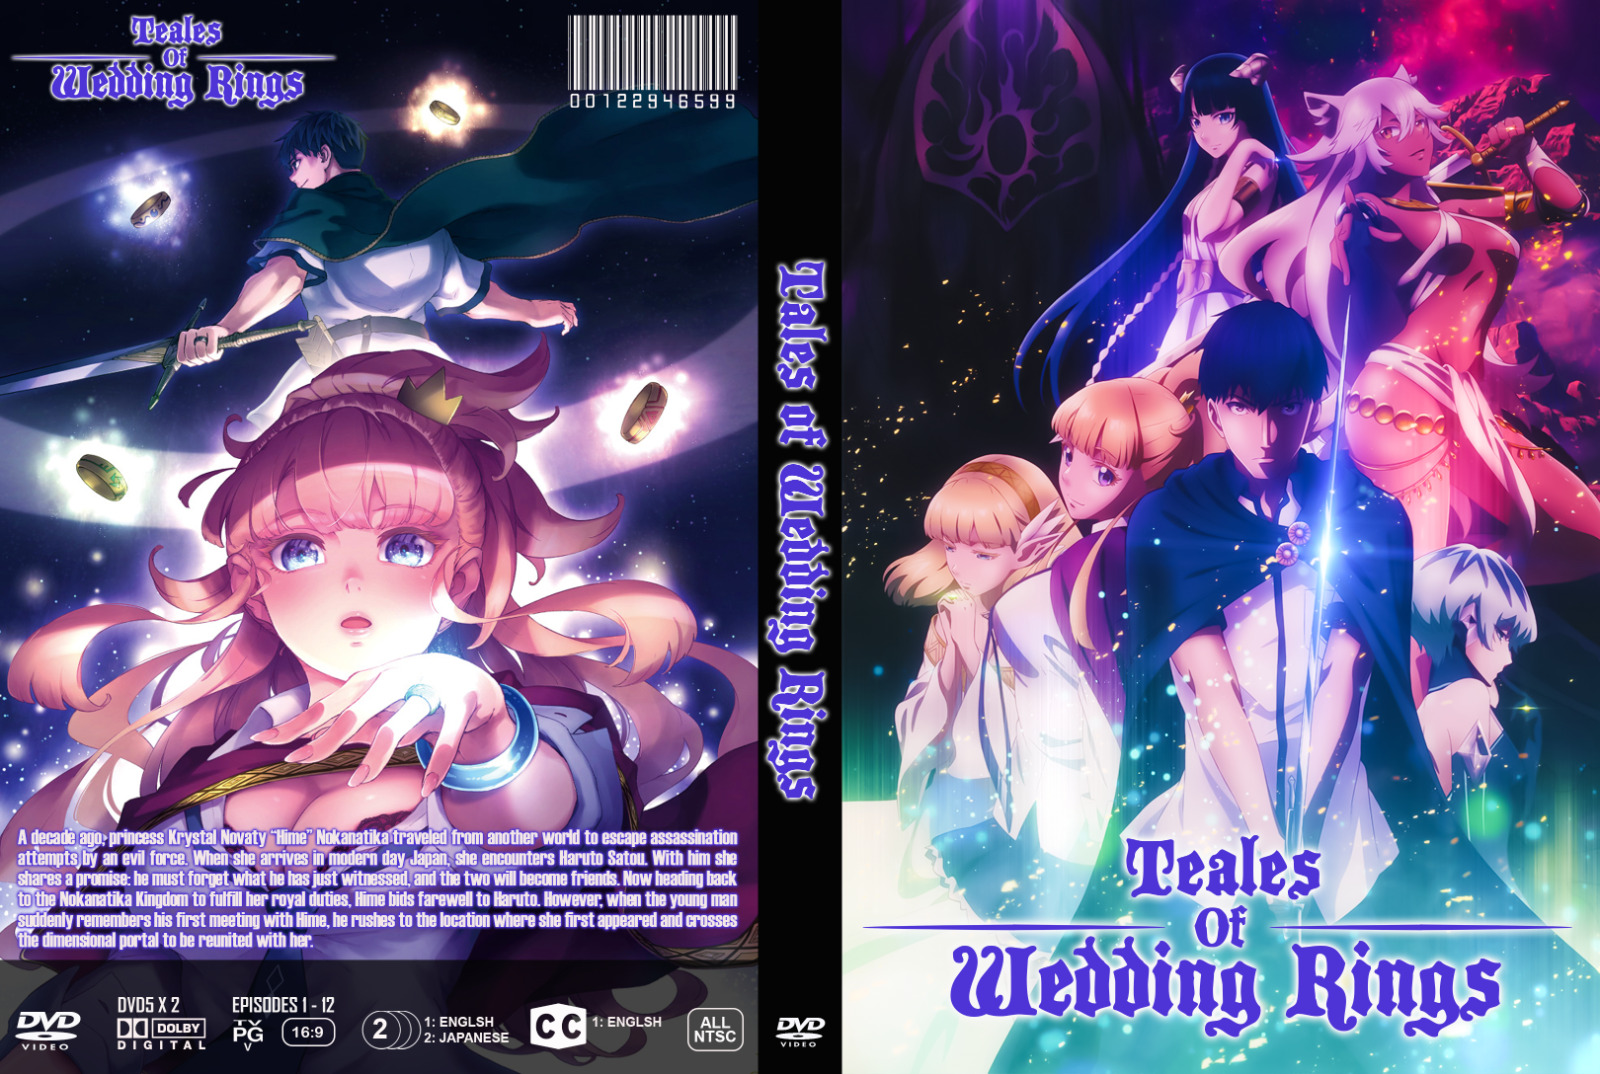 Tales of Wedding Rings Anime Series Episodes 1-12 Uncensored Dual Audio Eng/Jpn